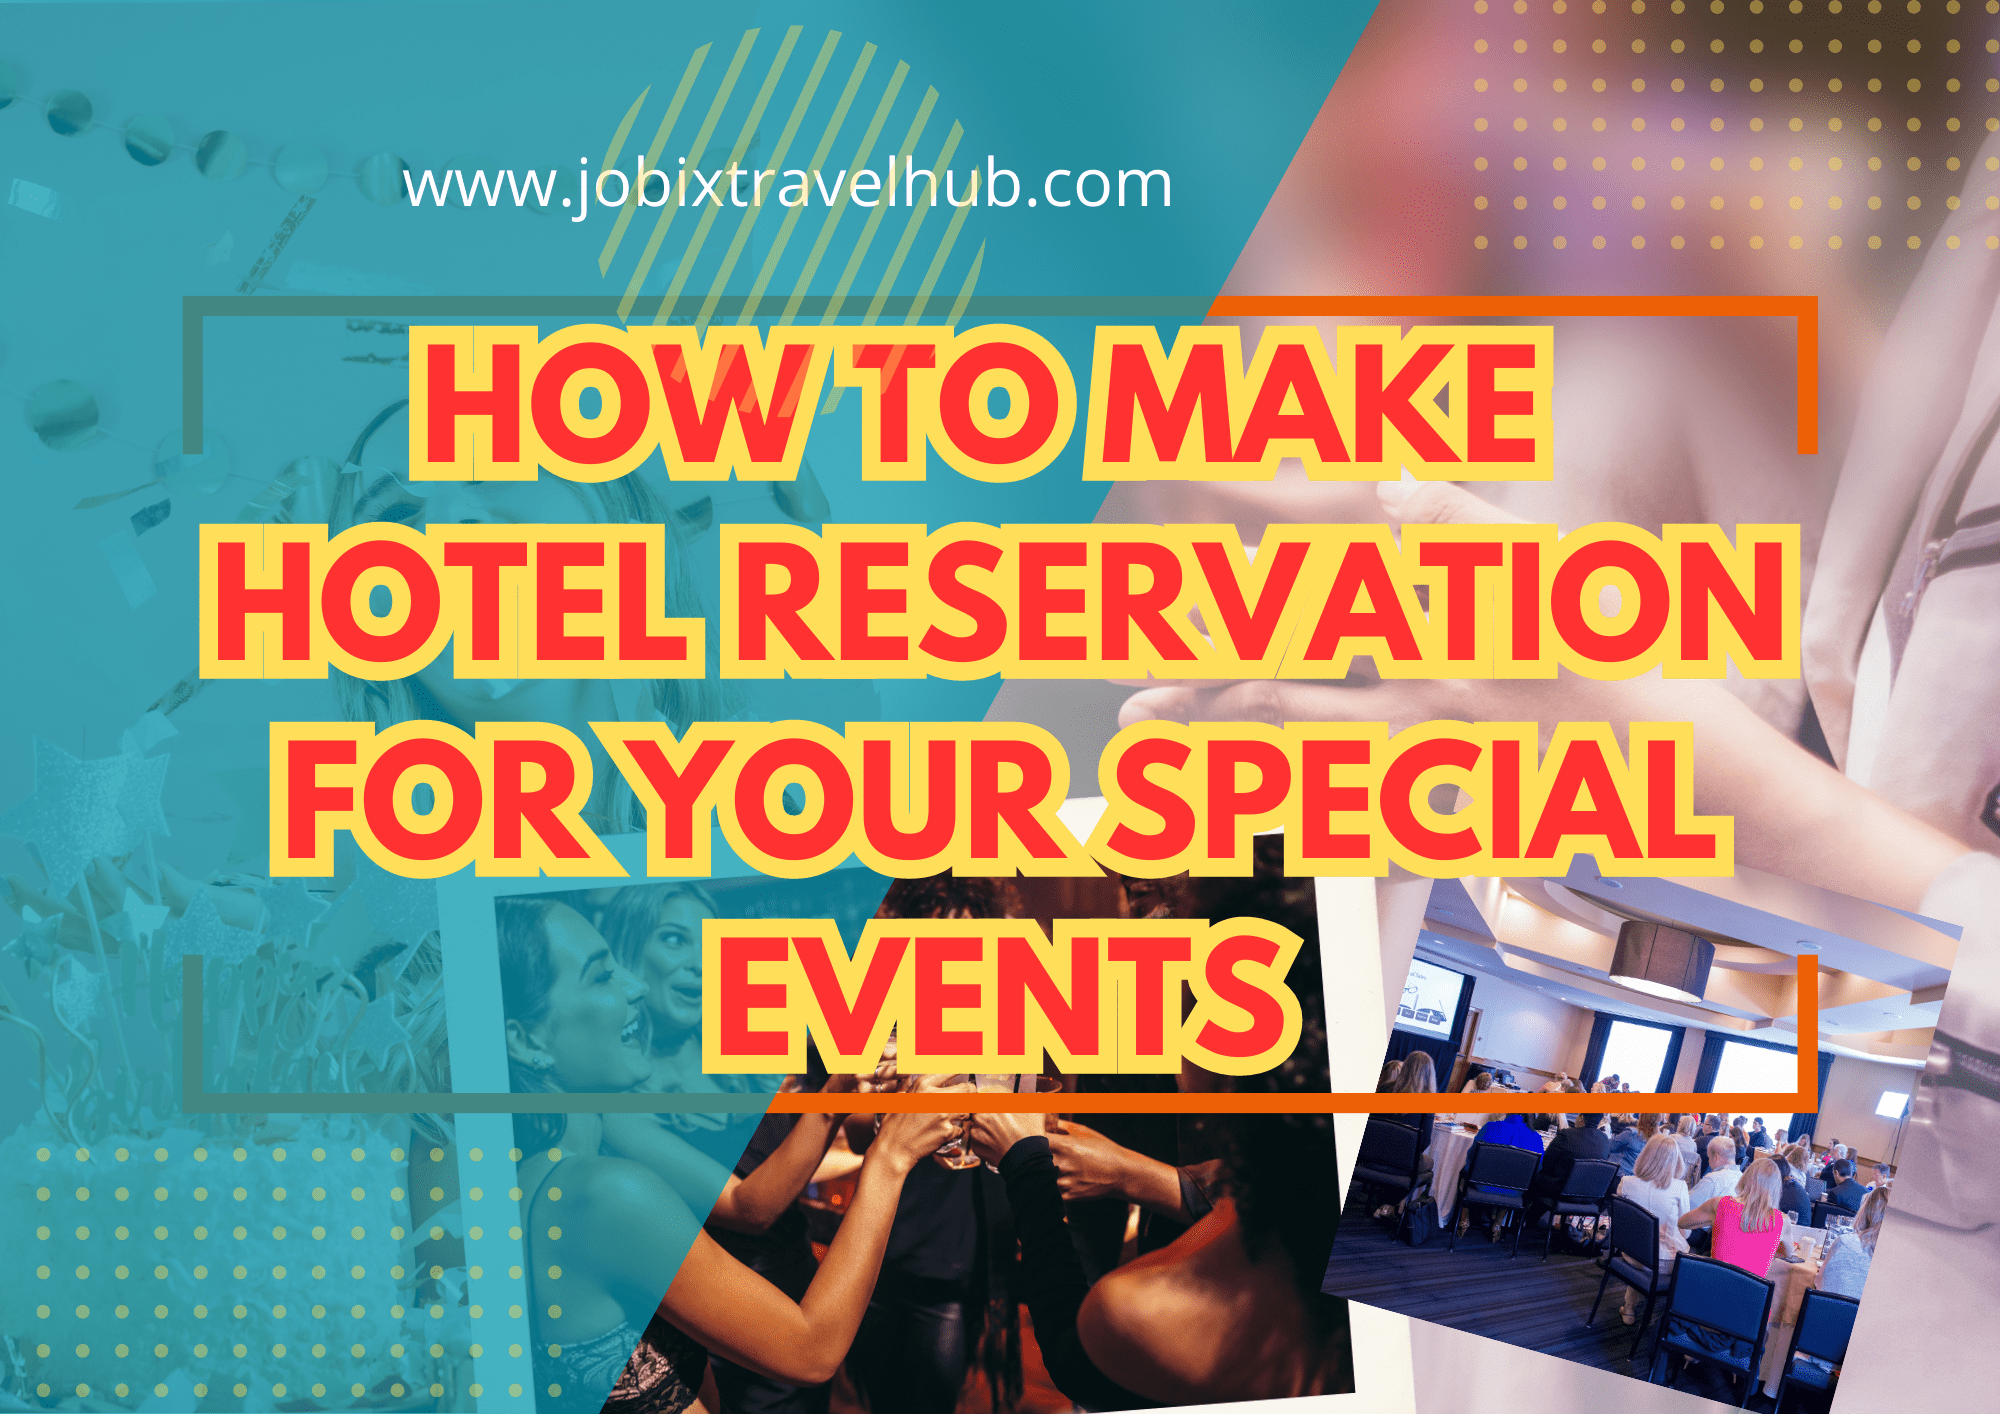 Are you ready to book a hotel for an upcoming event in your life? Let us make sure your hotel reservation and special occasion are on point!